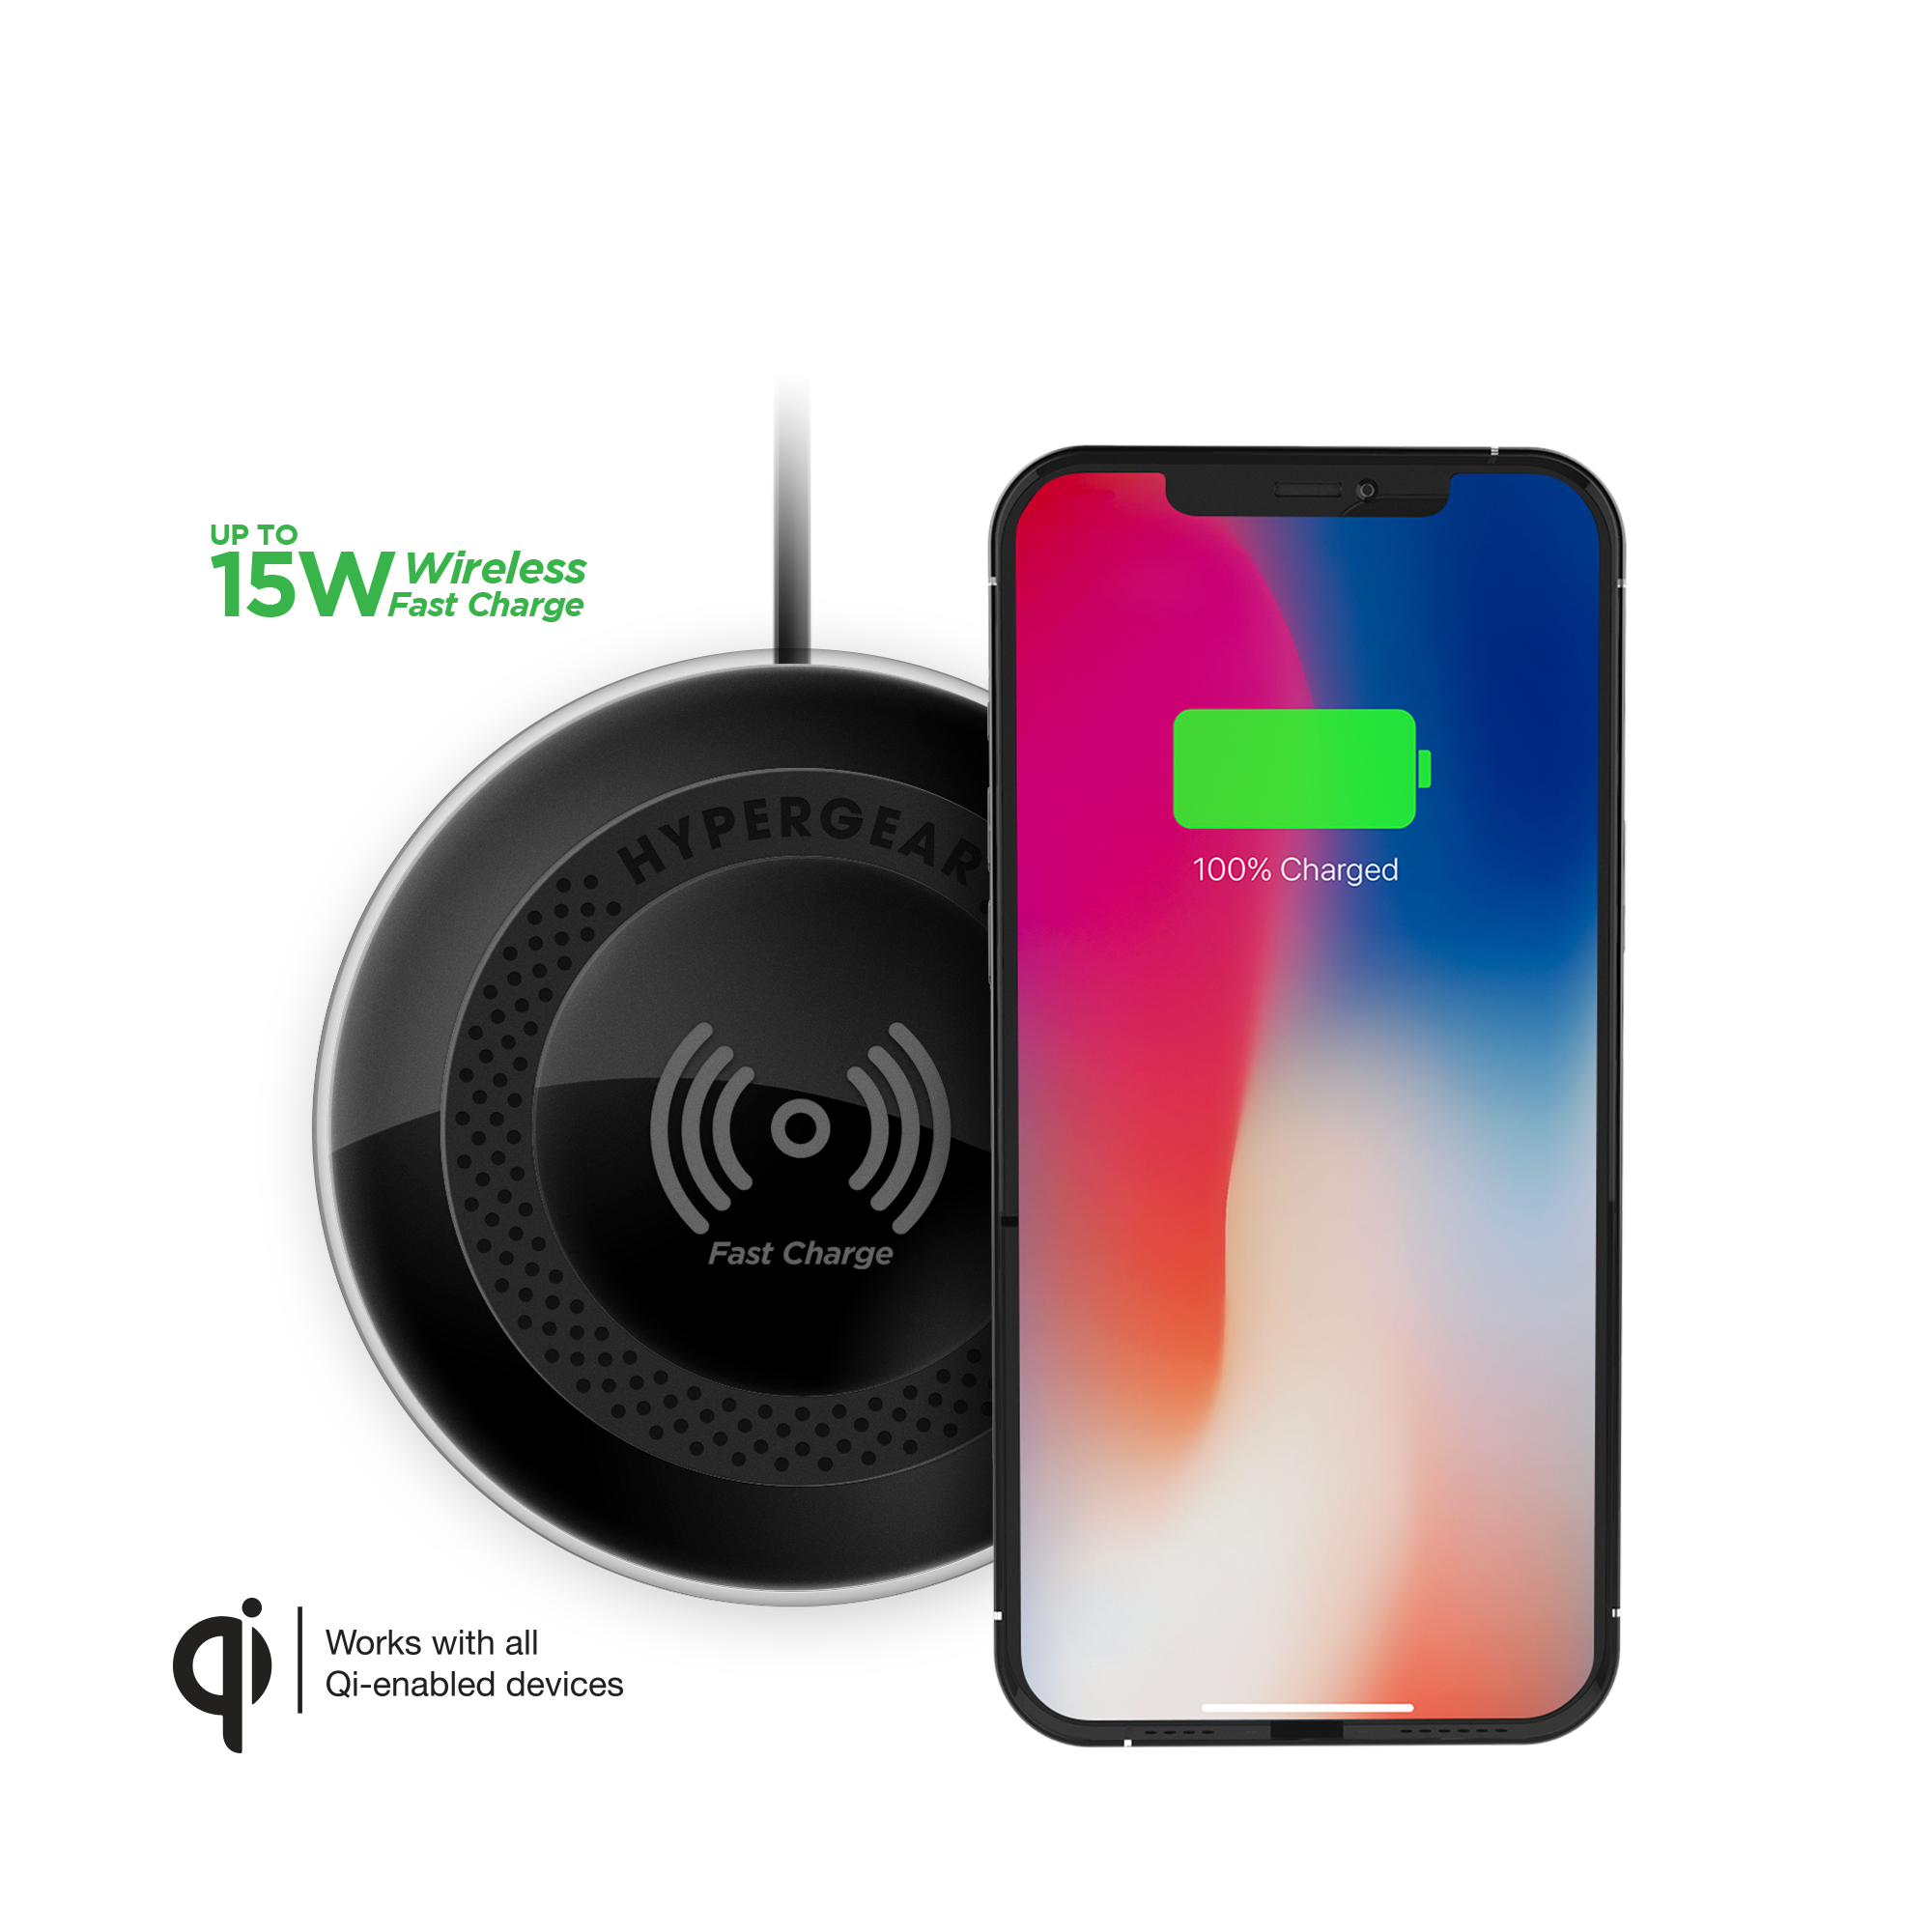 HyperGear ChargePad Pro 15W Wireless Fast Charger